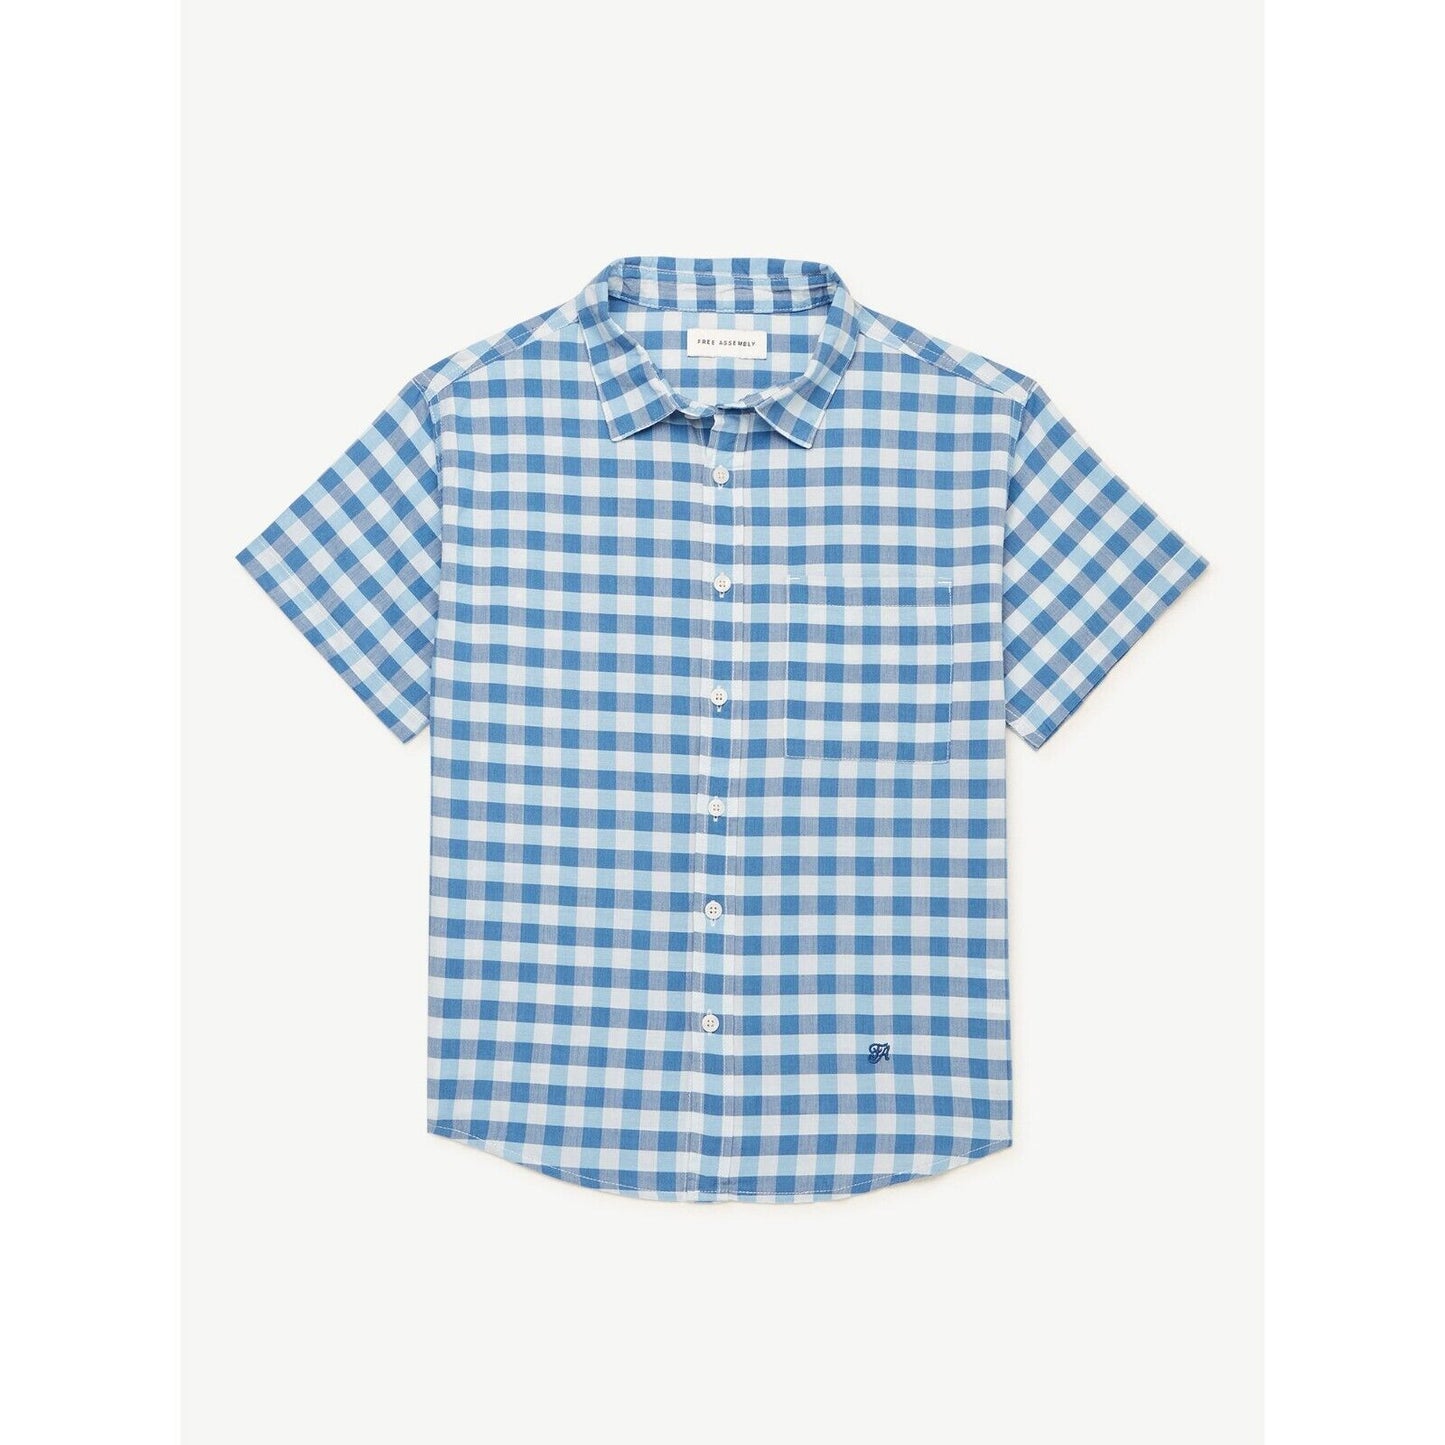 Free Assembly Boys Madras Button Down Shirt XS